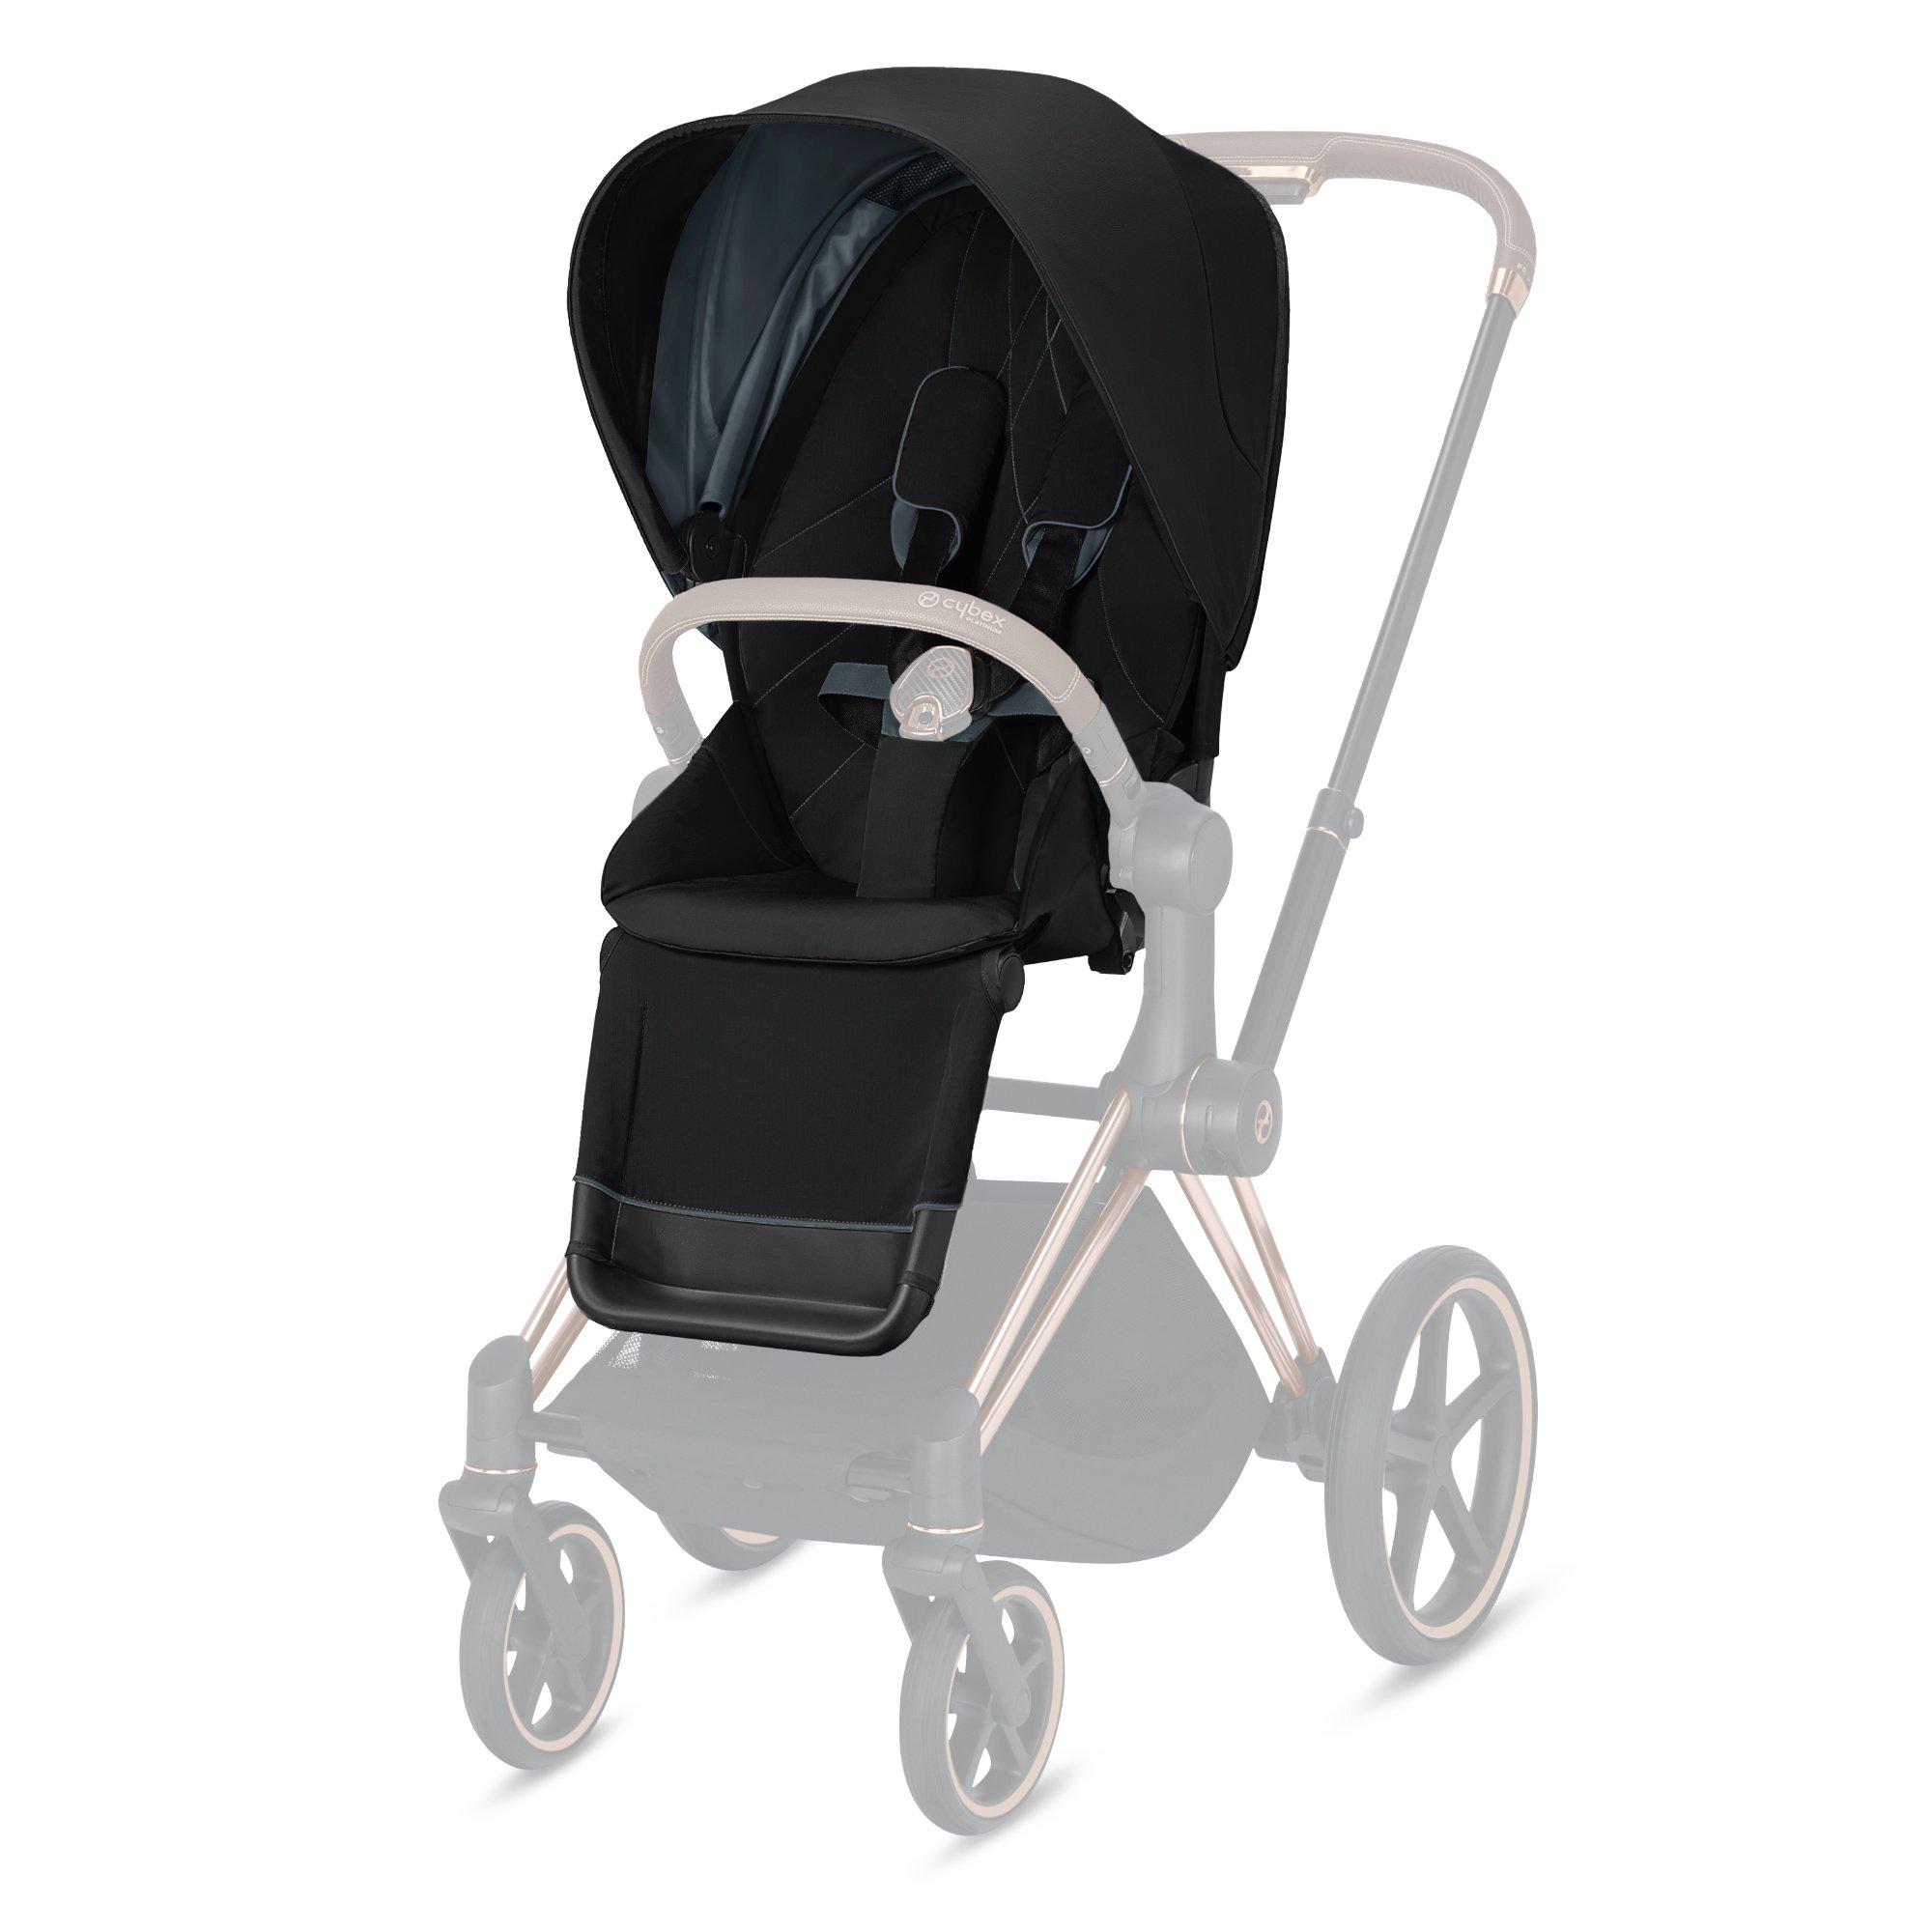 cybex priam outlet